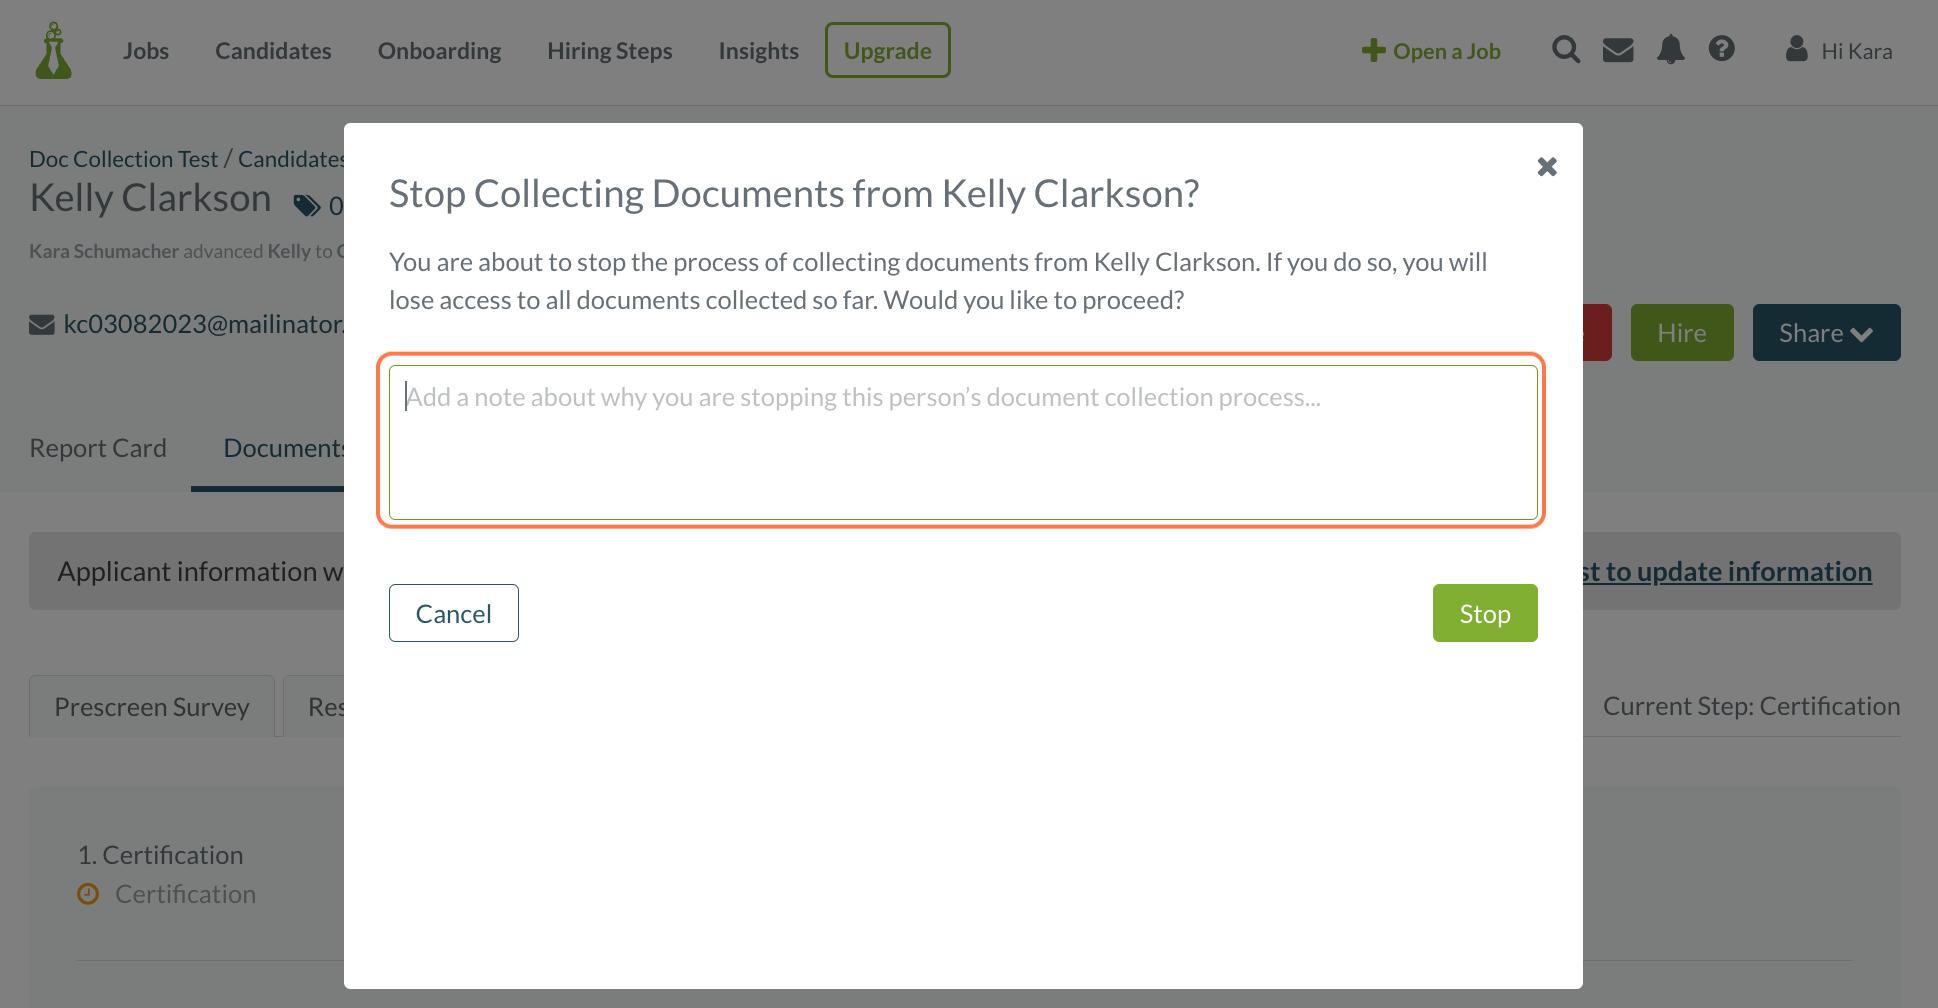 Click on Add a note about why you are stopping this person’s document collection process...